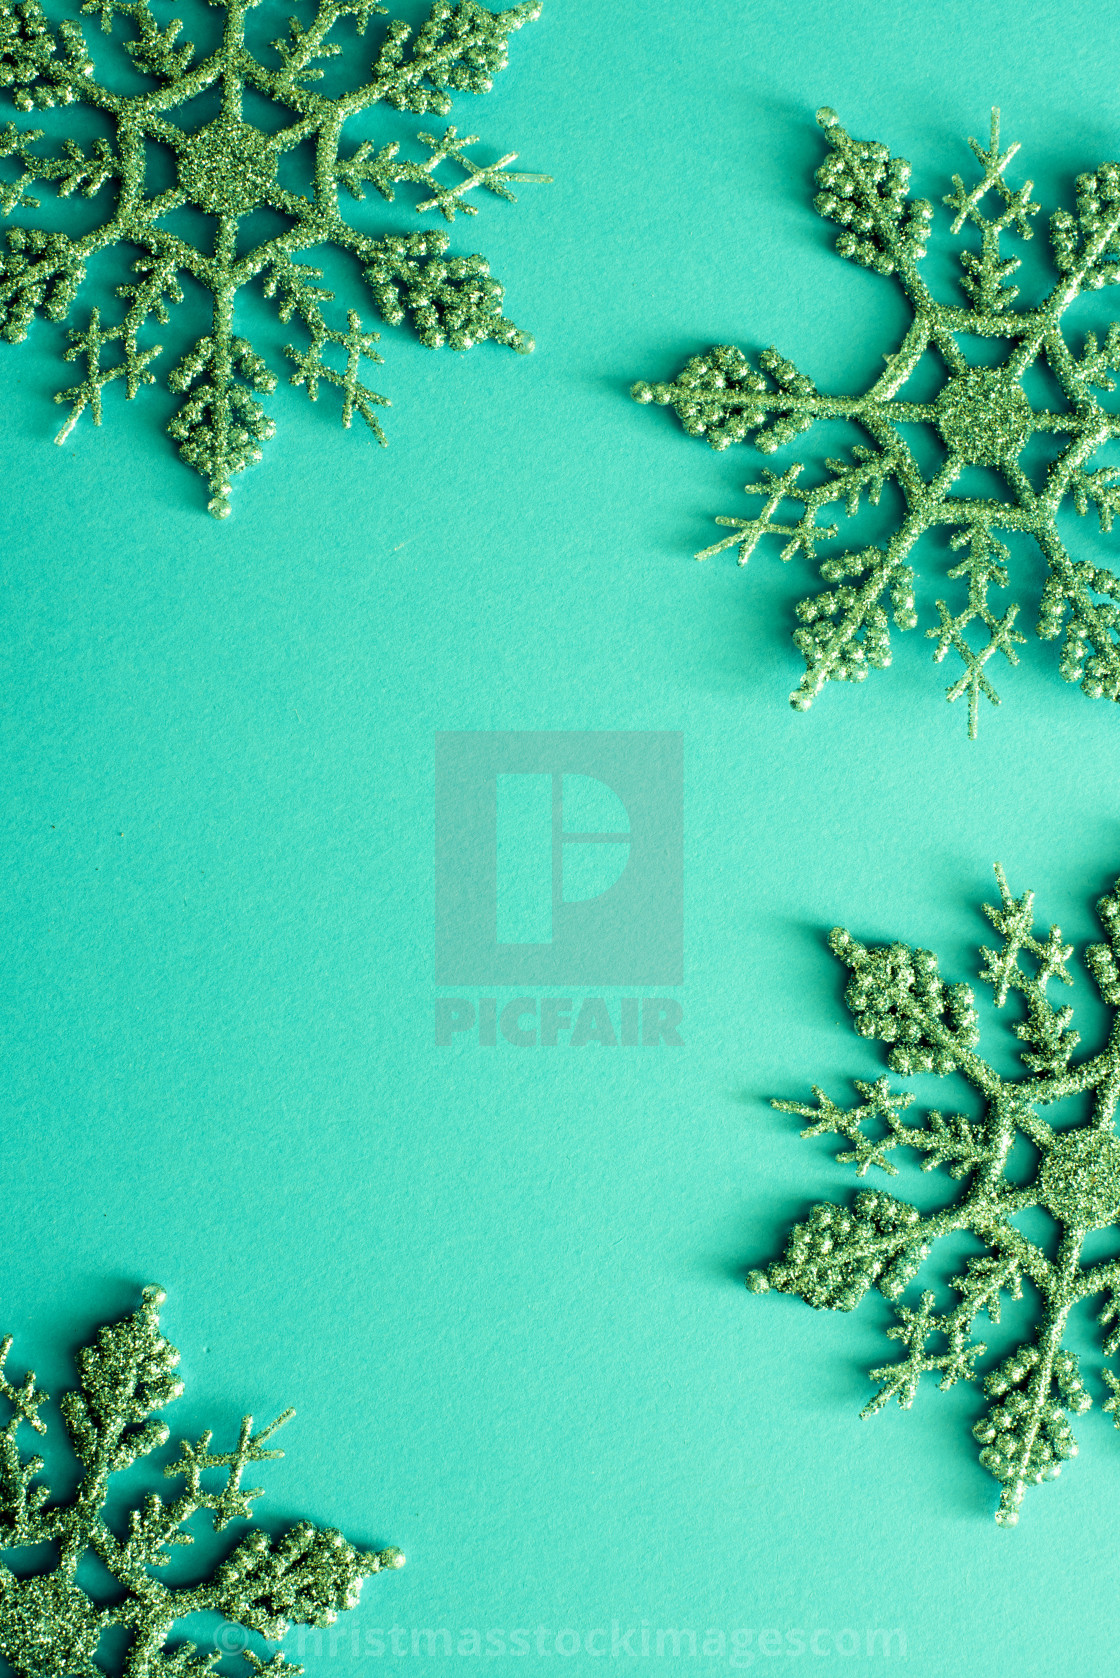 Green Background With Christmas Glitter Snowflakes License Download Or Print For 4 96 Photos Picfair